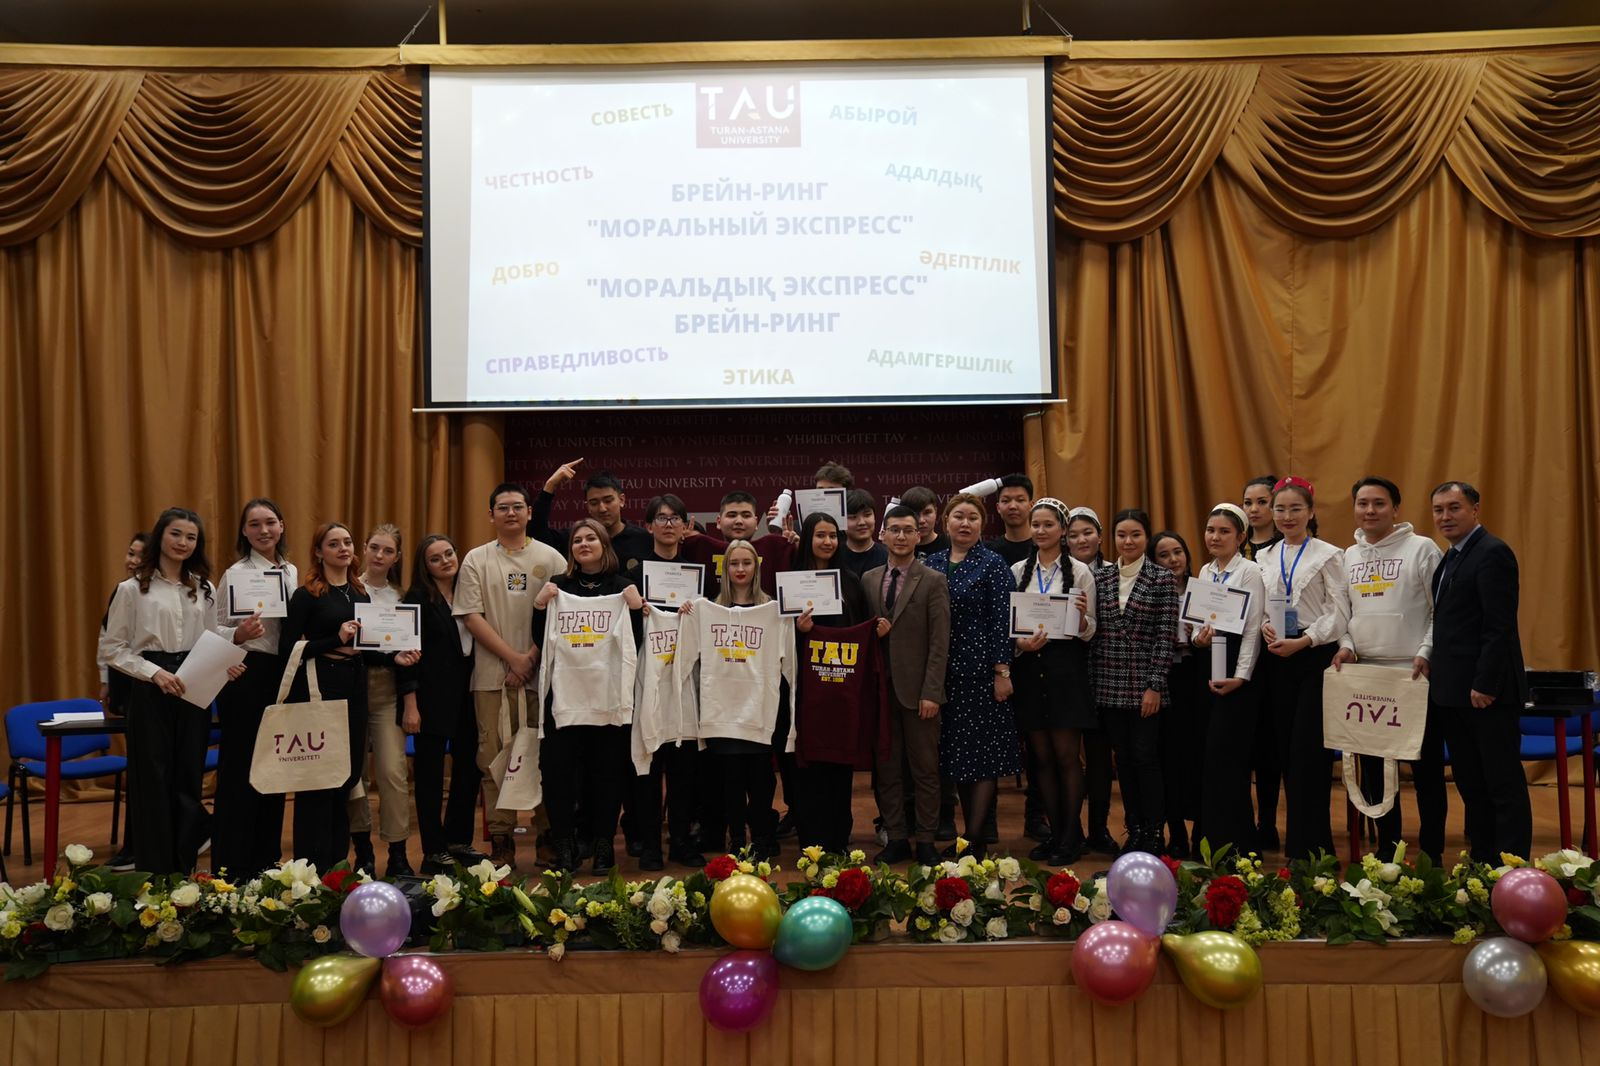 On Febrary 28, 2023 the brain-ring «Moral Express» was held among students